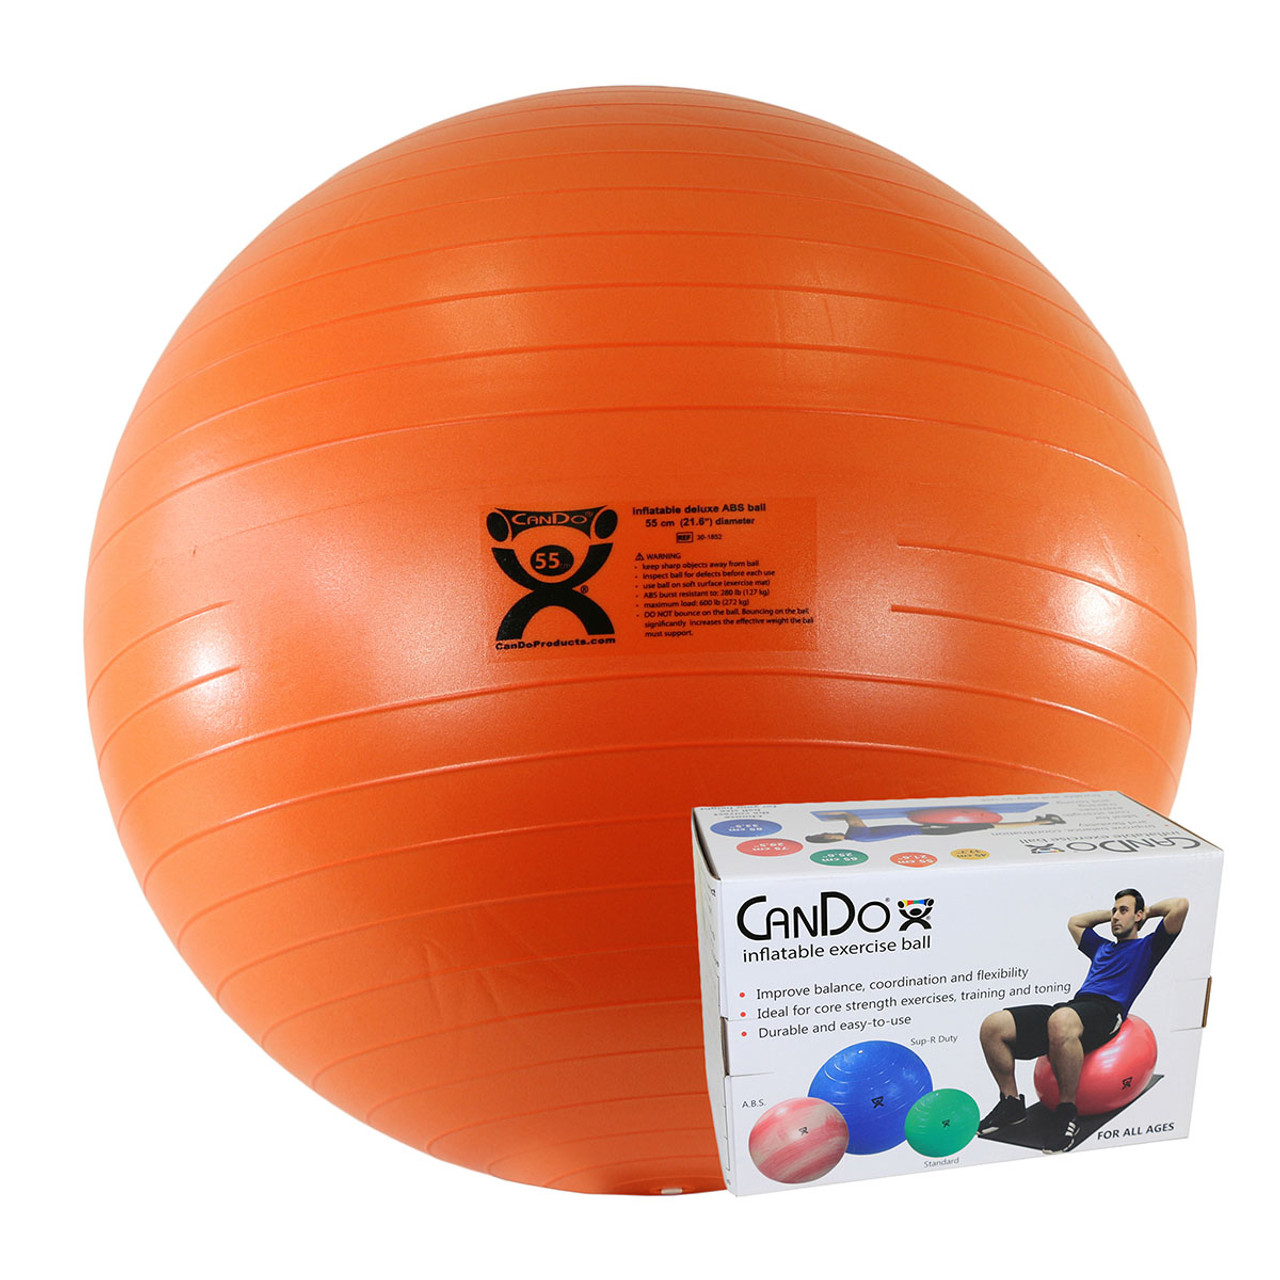 CanDo¨ Inflatable Exercise Ball - ABS Extra Thick - Orange - 22" (55 cm), Retail Box